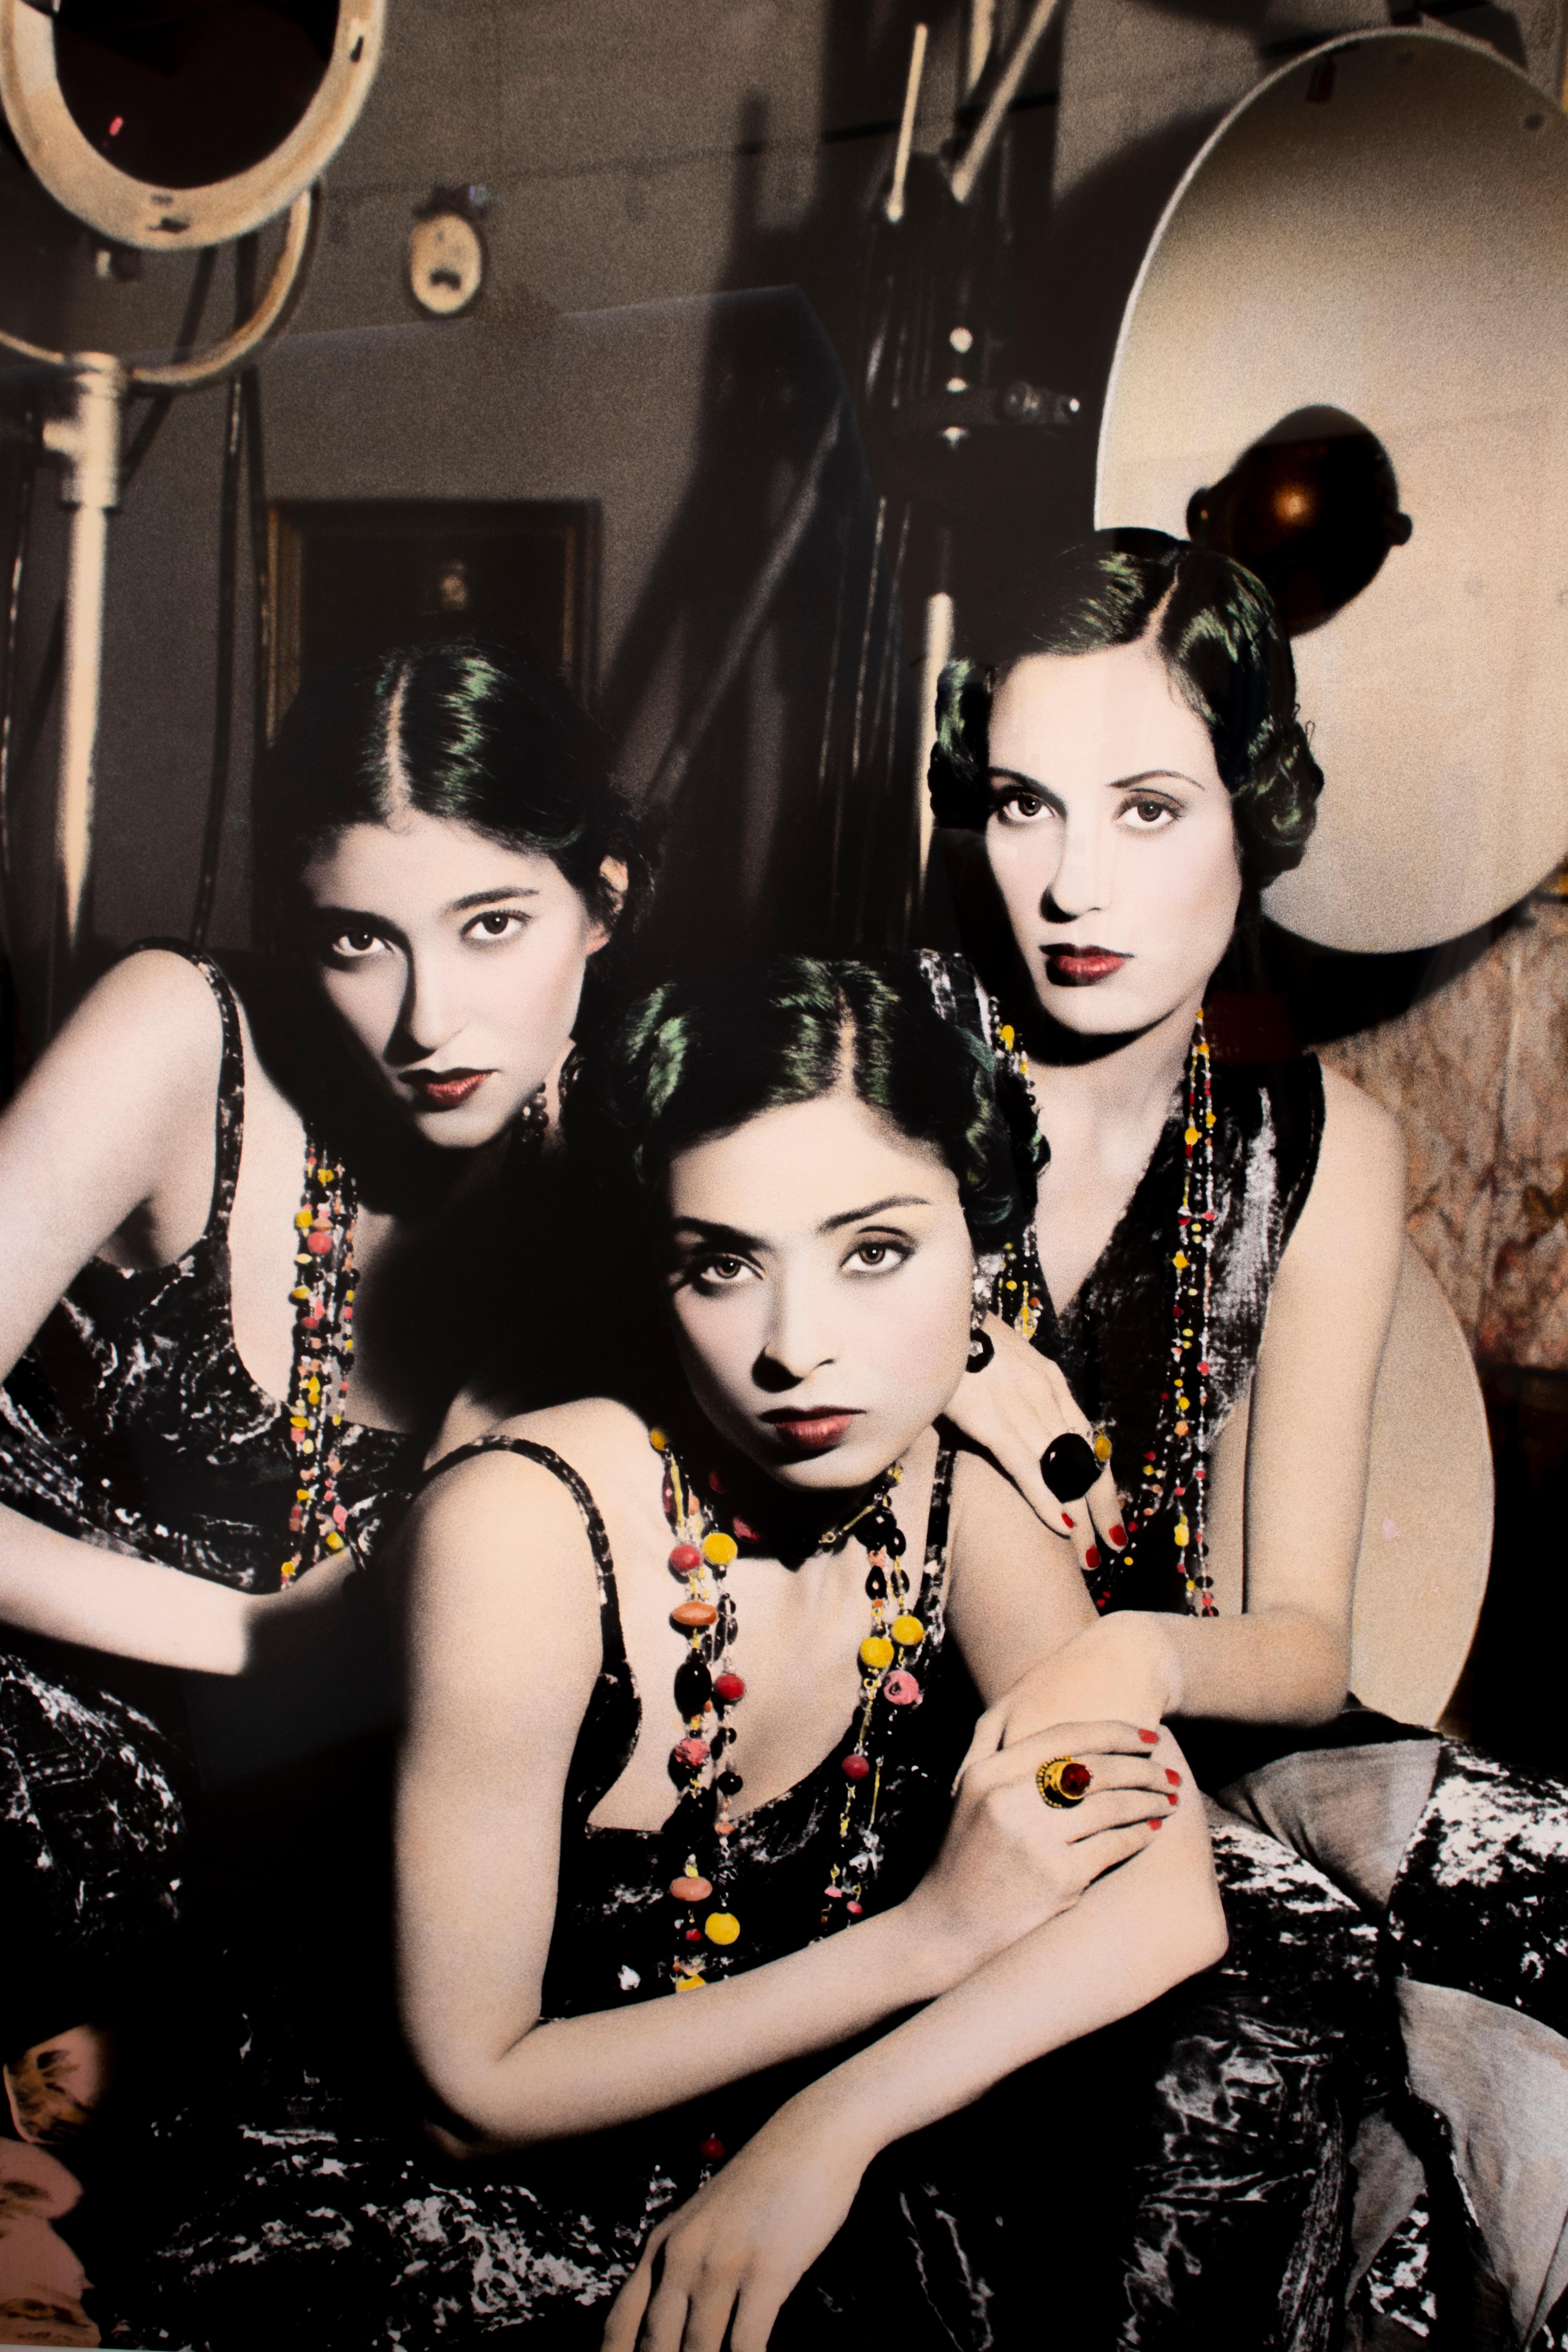 “Three Girls in Studio, Cairo” is a print of a Black and White photgraph by Youssef Nabil from 1993, hand-colored by the artist. Exhibition label at the verso states, that this print is number 2 of 3 in limited edition executed in 2000. The